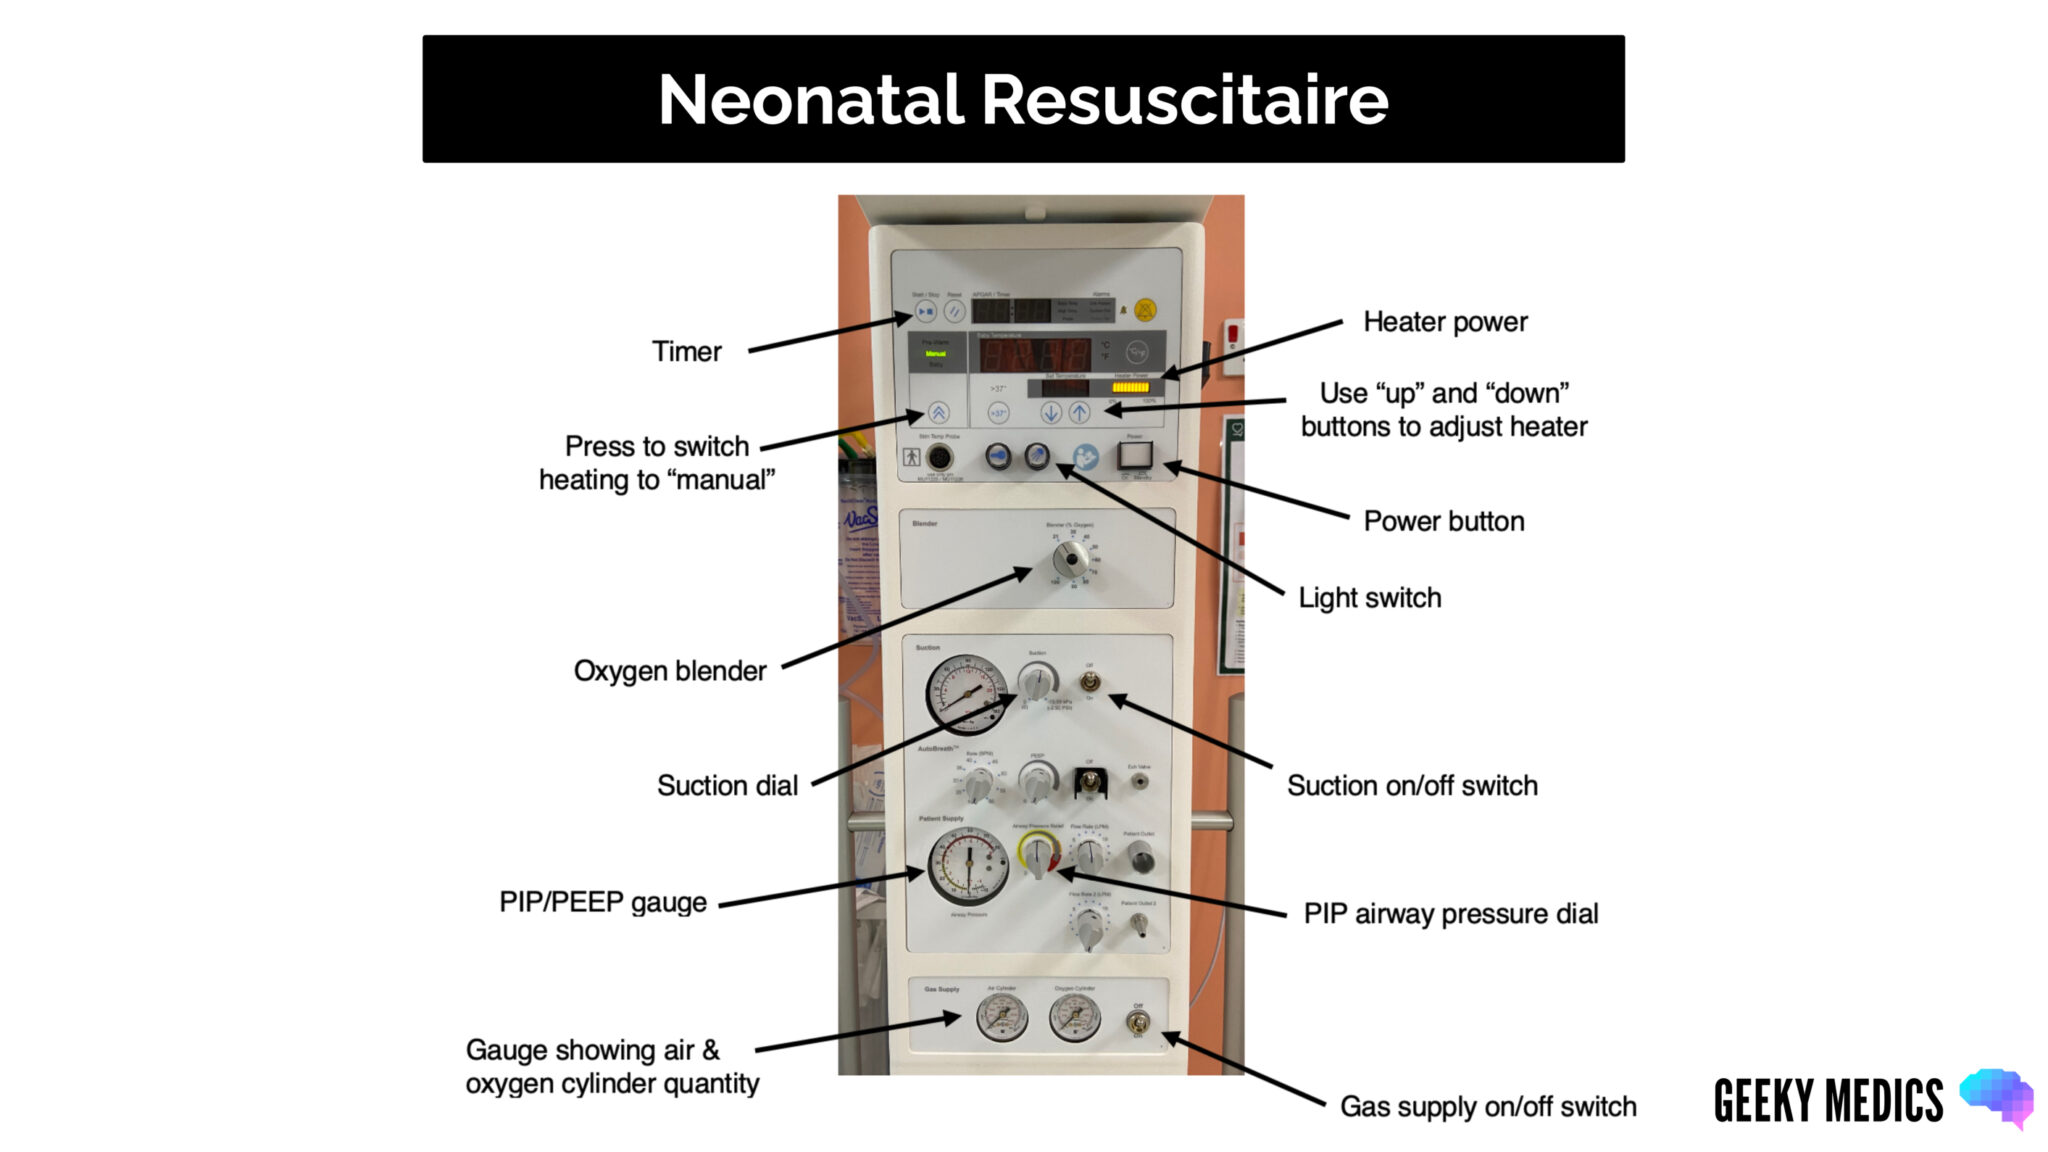 Setting up a Neonatal Resuscitaire